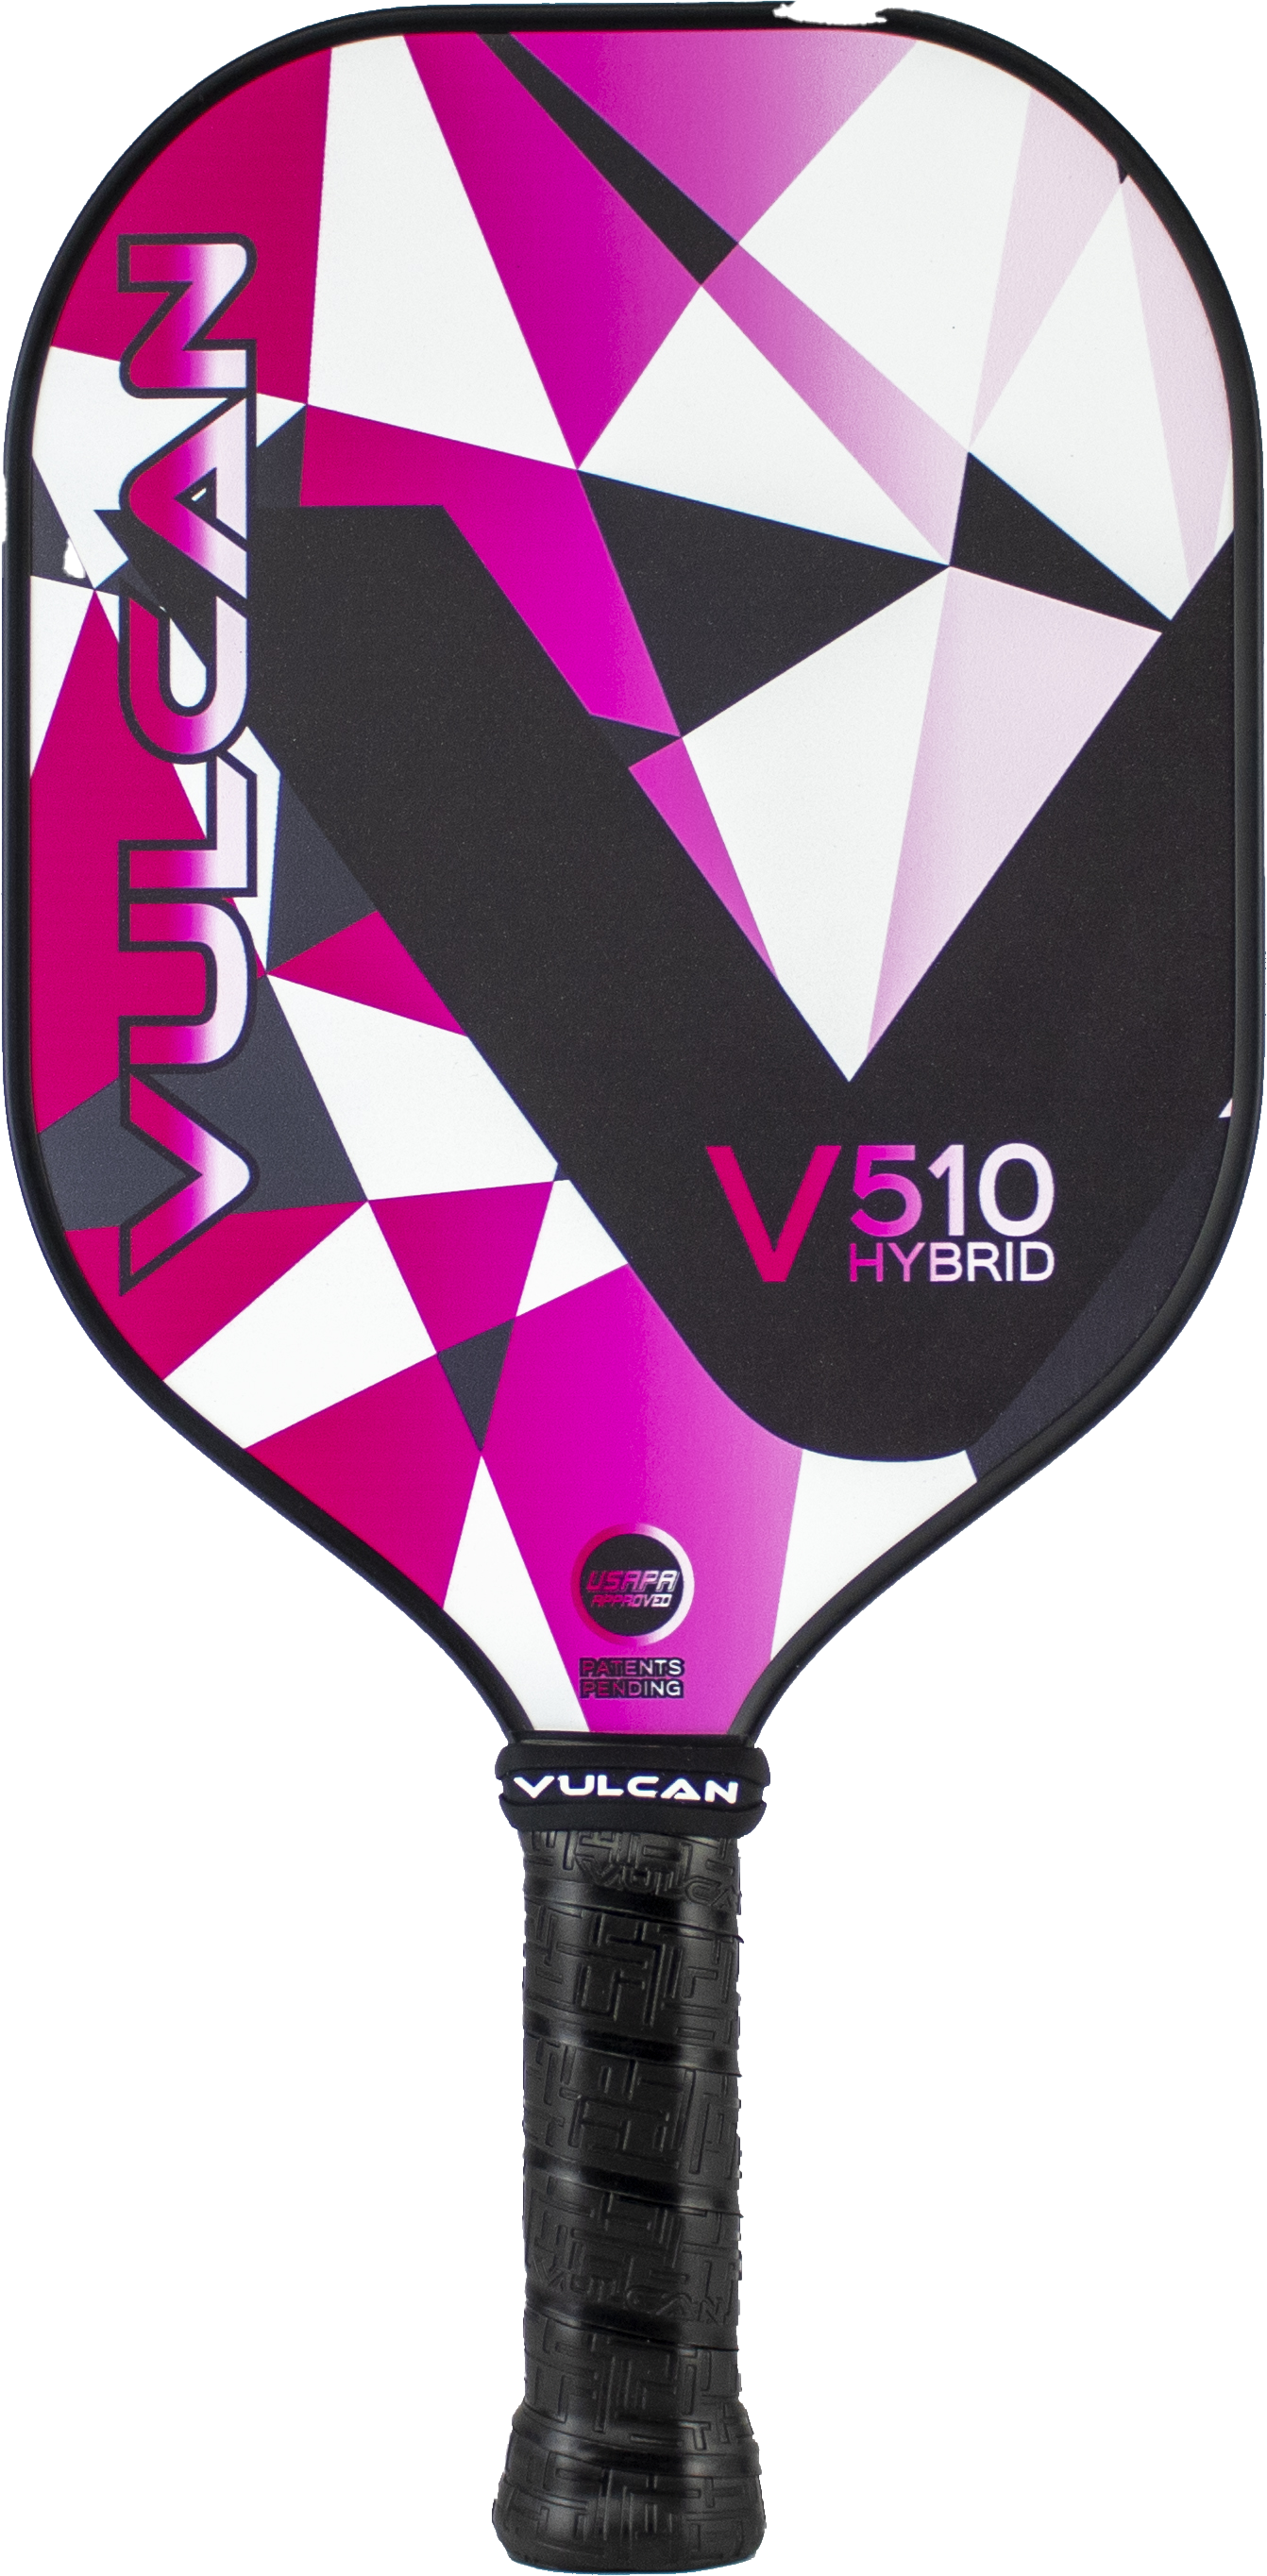 A pink and black Vulcan V510 Hybrid Pickleball Paddle with a black handle.